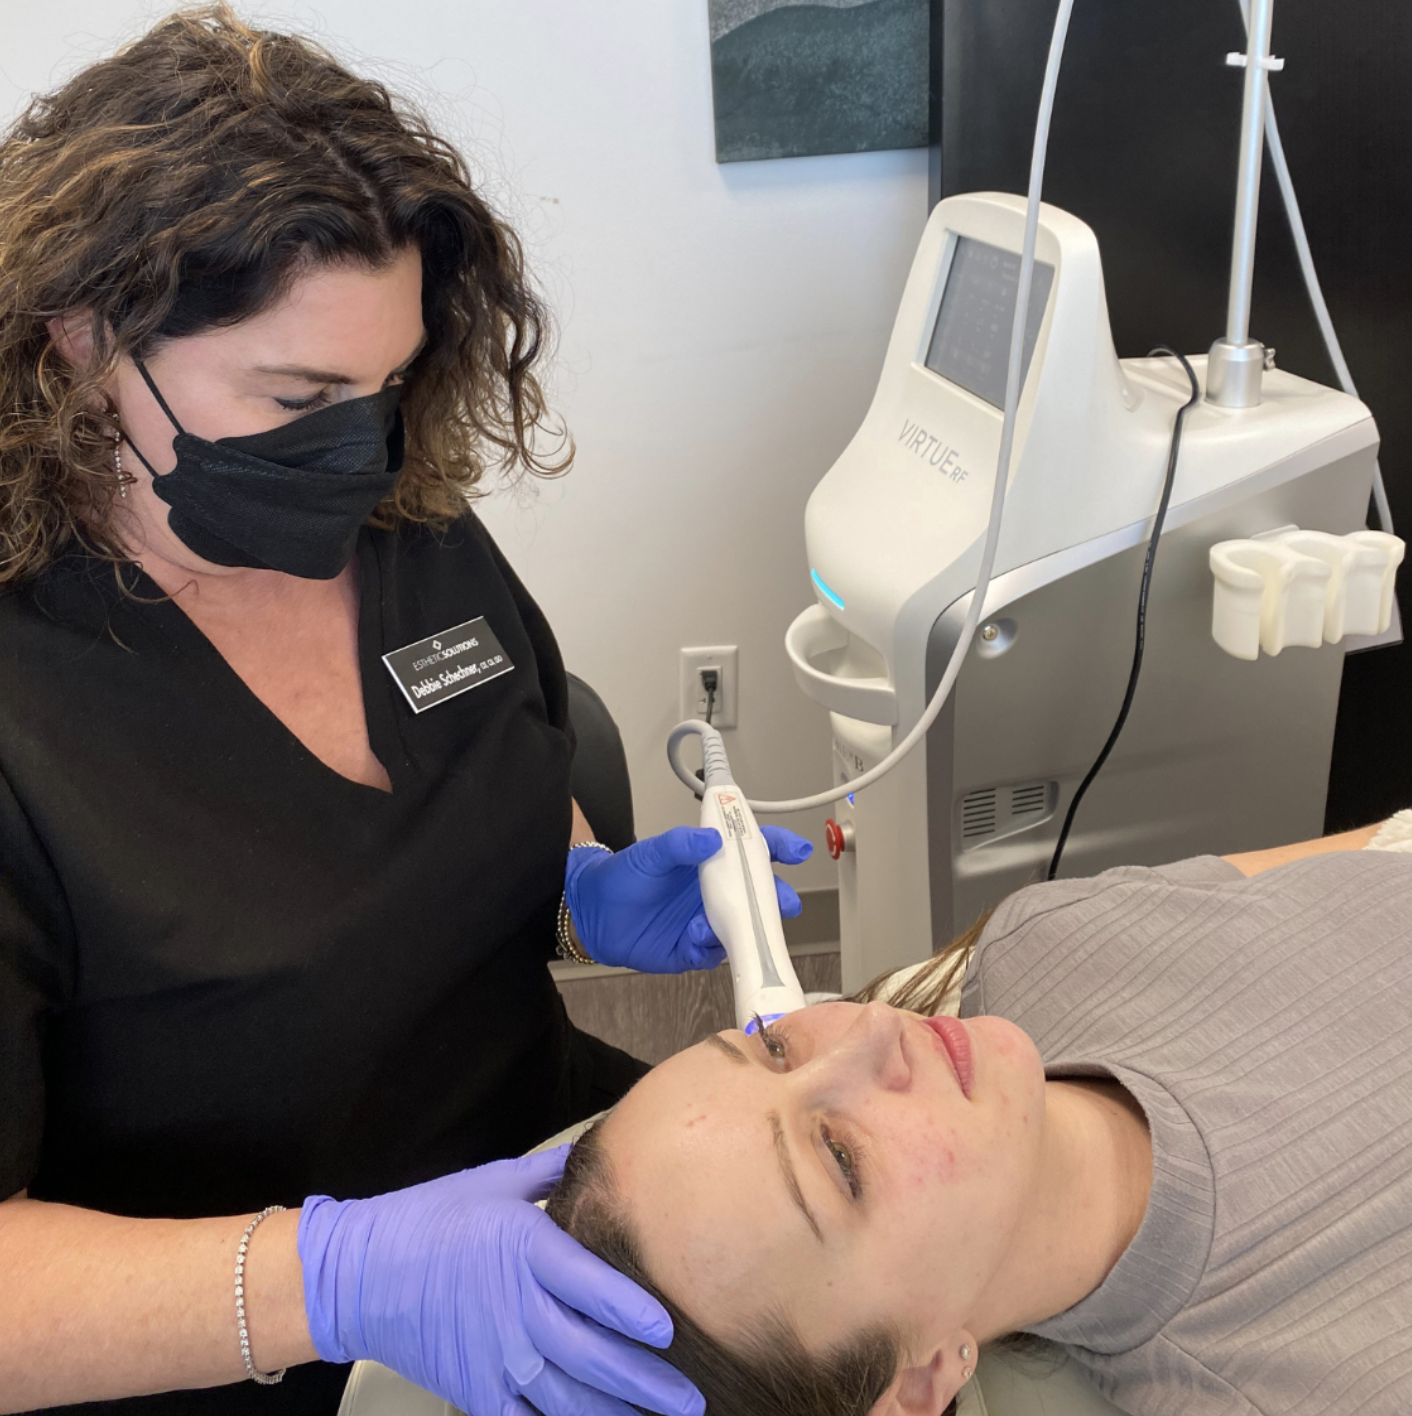 An Esthetic Solutions laser technician using the VirtueRF Microneedling treatment on a patient.